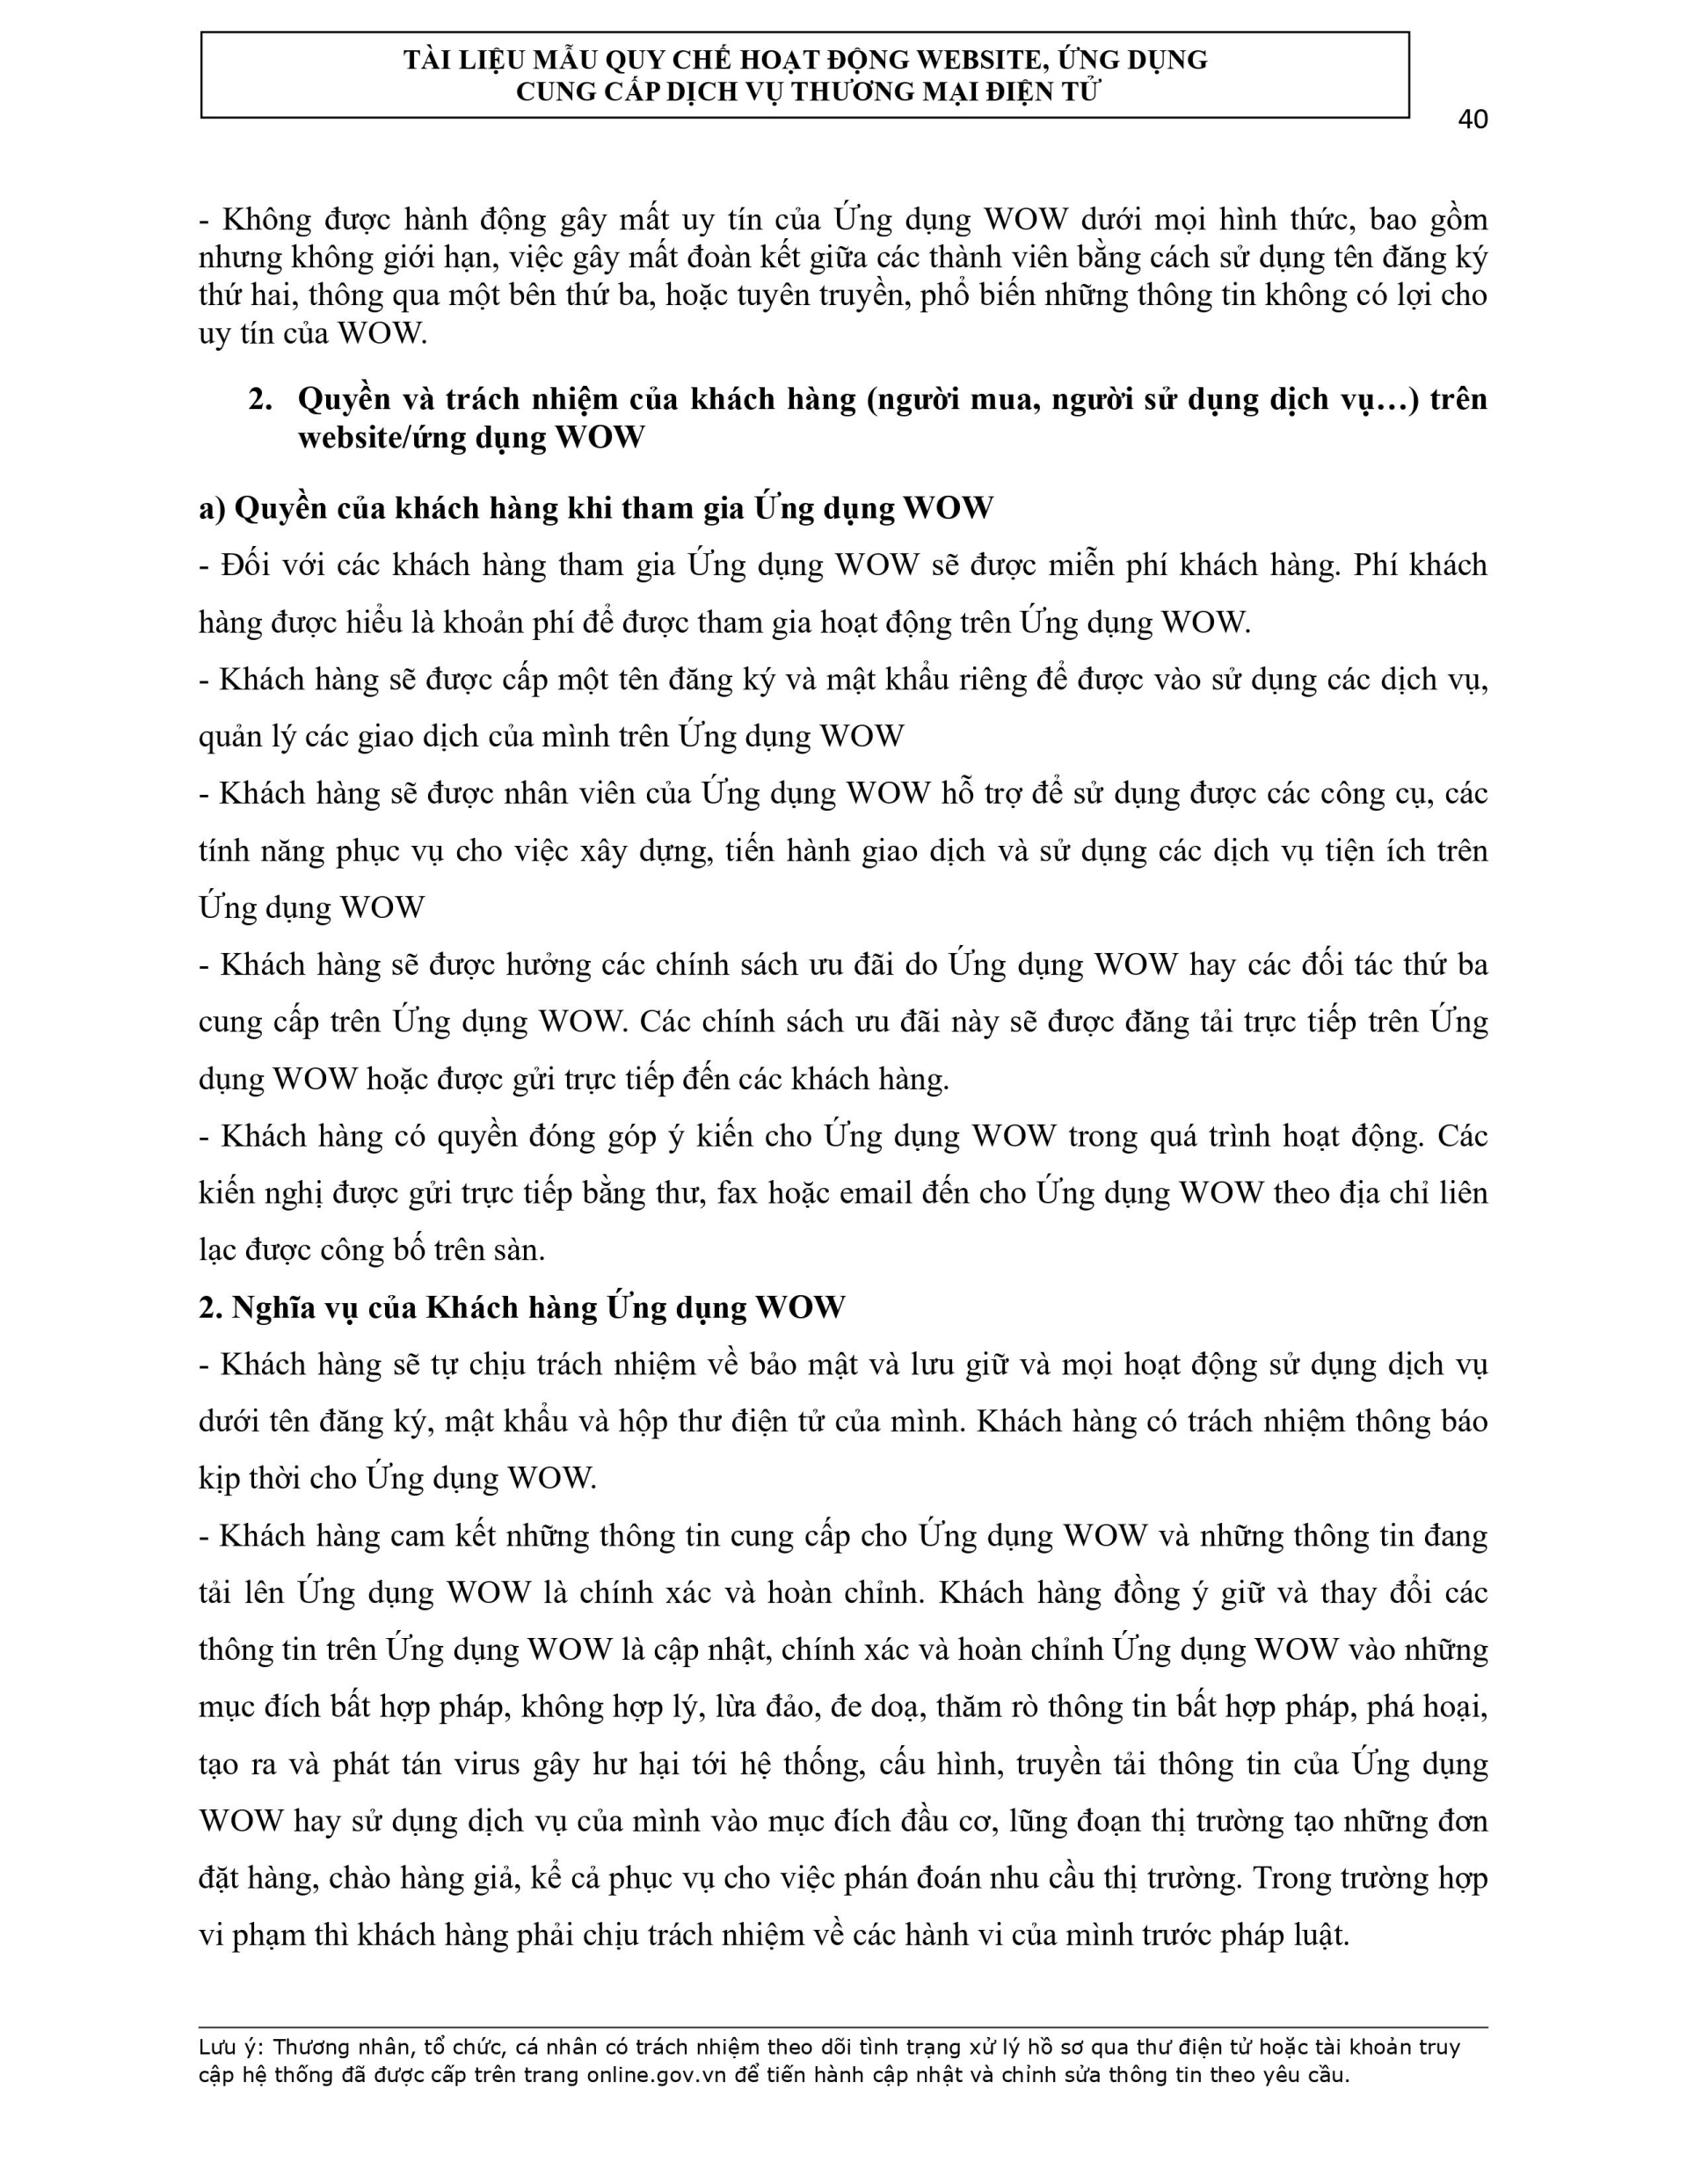 quy-che-hoat-dong-ung-dung-wow-page-0040